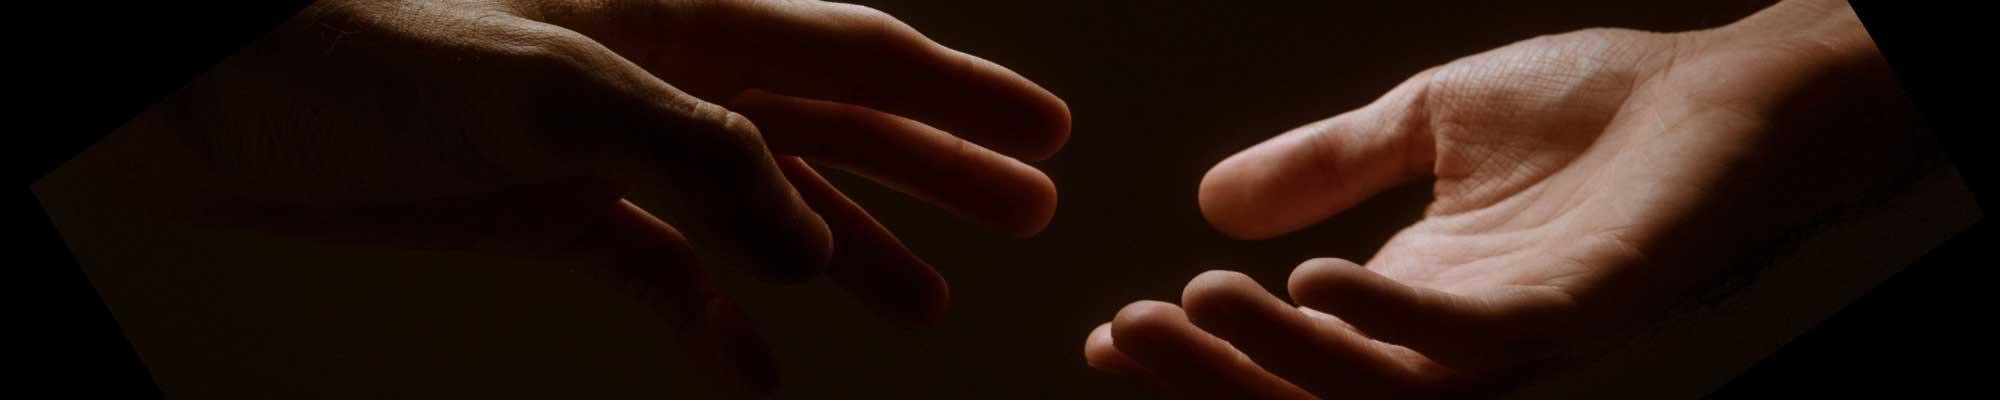 An image of a hand reaching to another hand.